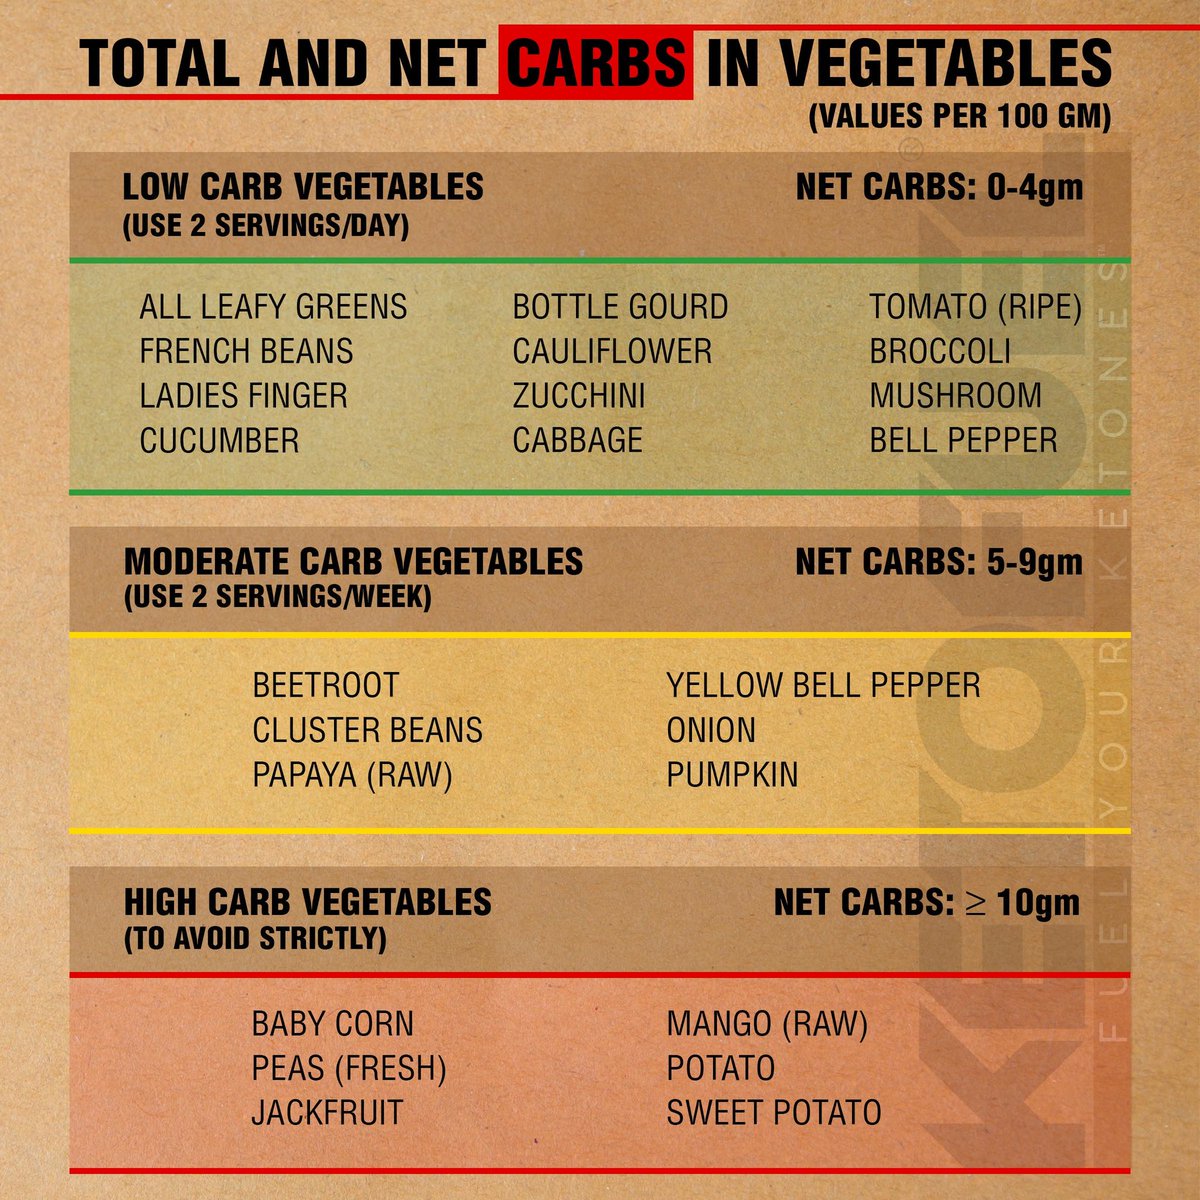 Dietary fibre counts as a Carb, but body finds it difficult to break it down to sugar or glycogen. Keeping a tab on 'Net Carbs' by restricting high carb vegetables can be a great way to effectively maintain Nutritional Ketosis
.
.
#lowcarbveg #ketolifestyle #nutritionalketosis